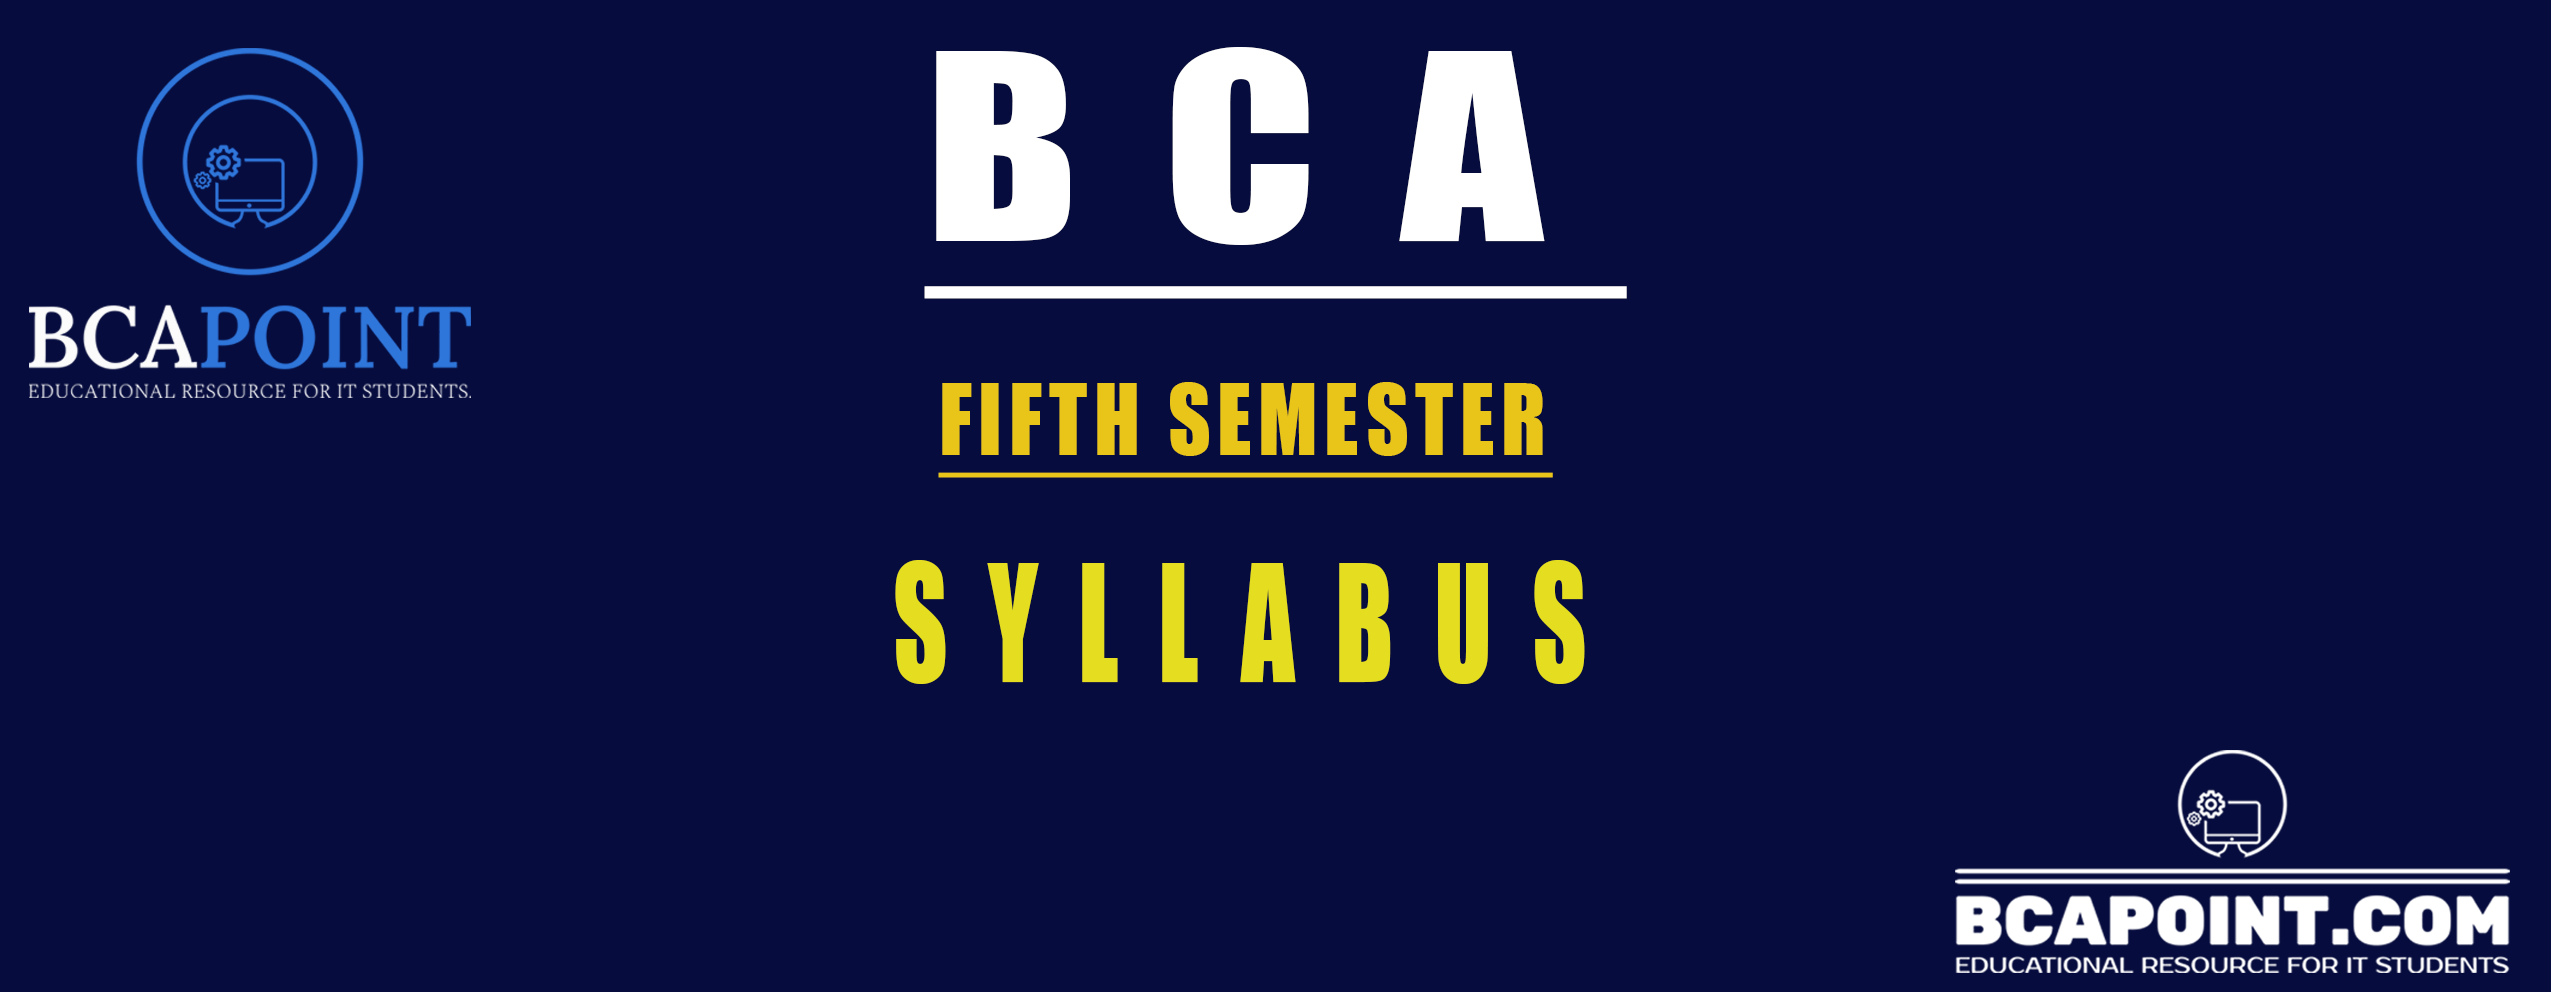 You are currently viewing BCA FIFTH SEMESTER SYLLABUS